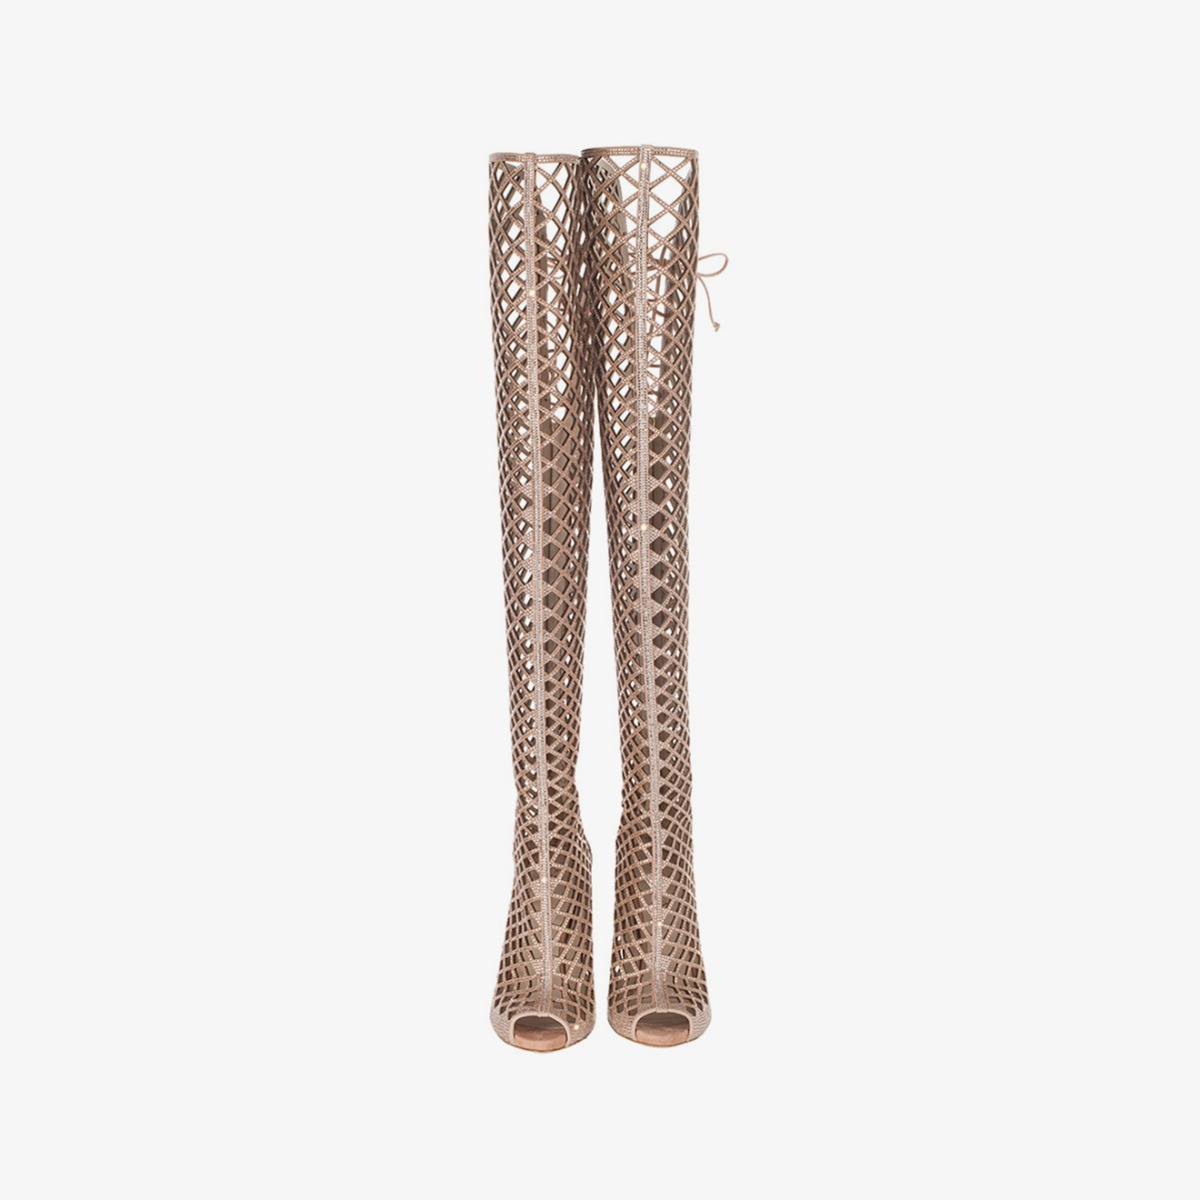 DITA BOOT 110 mm - Le Silla official outlet